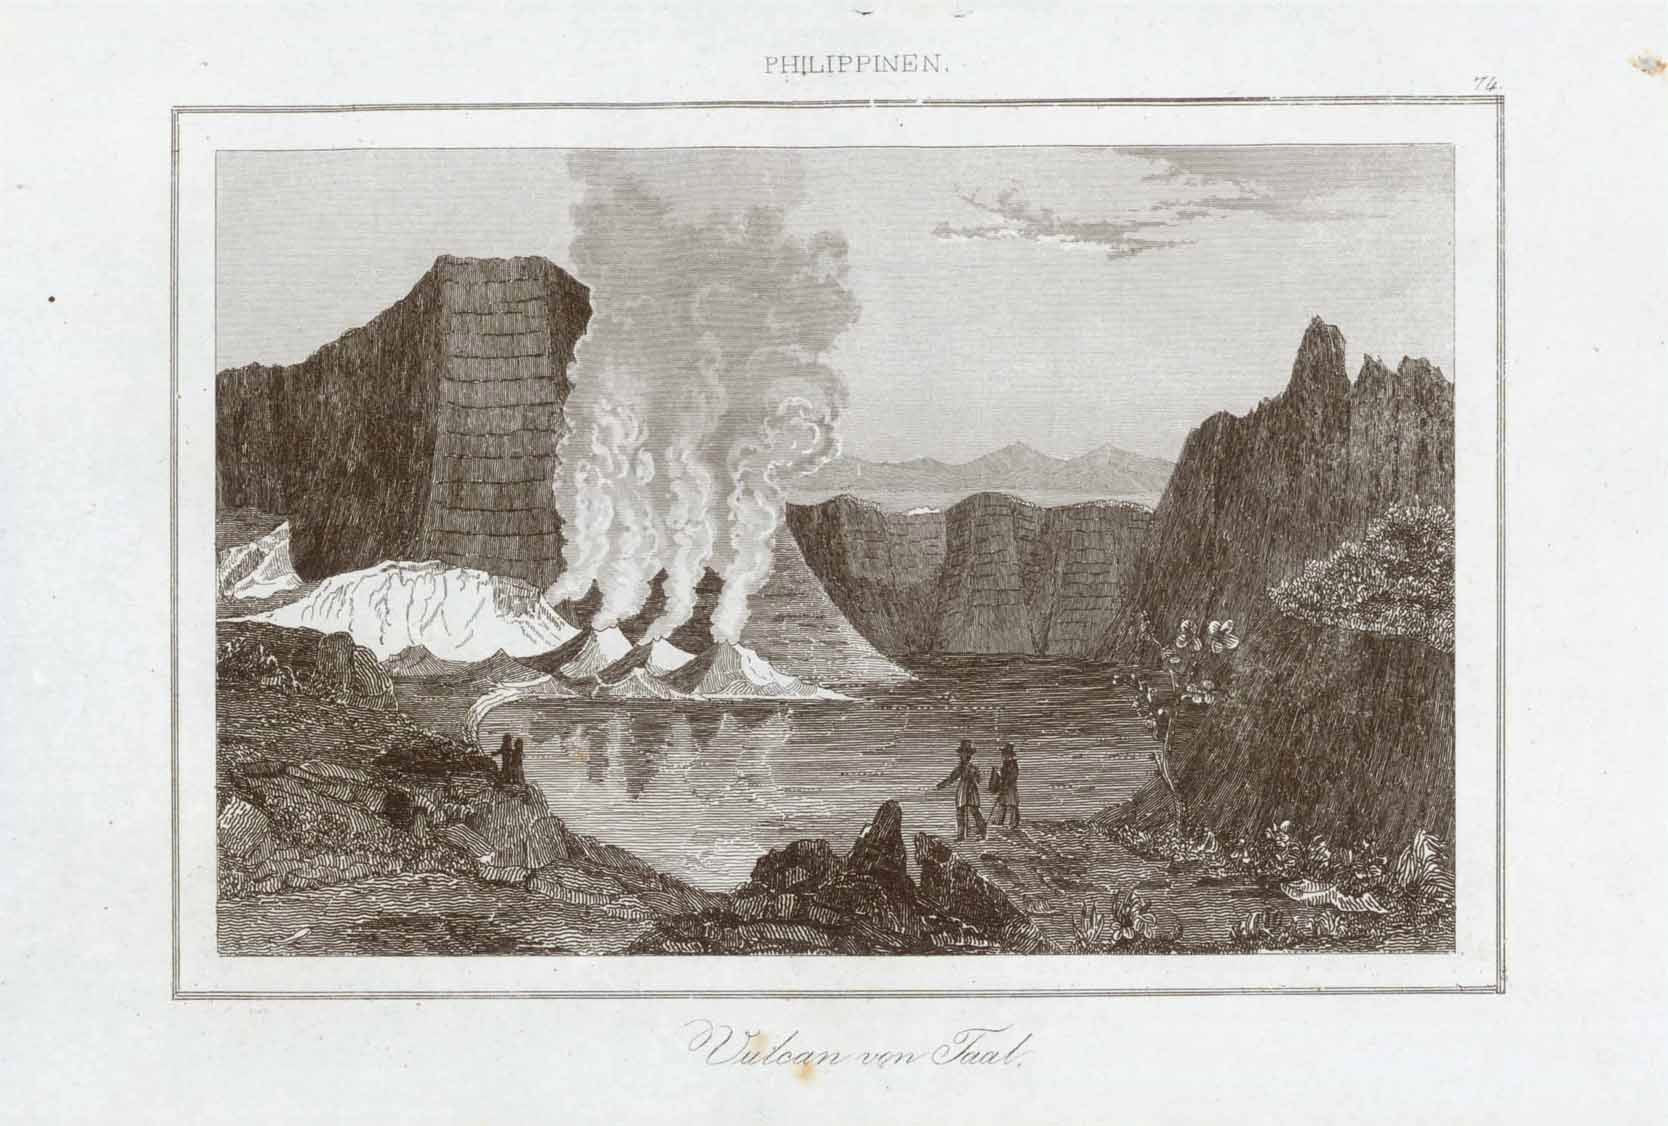 "Philipinnen" "Volcano von Taal"  Steel engraving ca 1845, Two tiny binding holes above the word "Philippinen"  Original antique print  